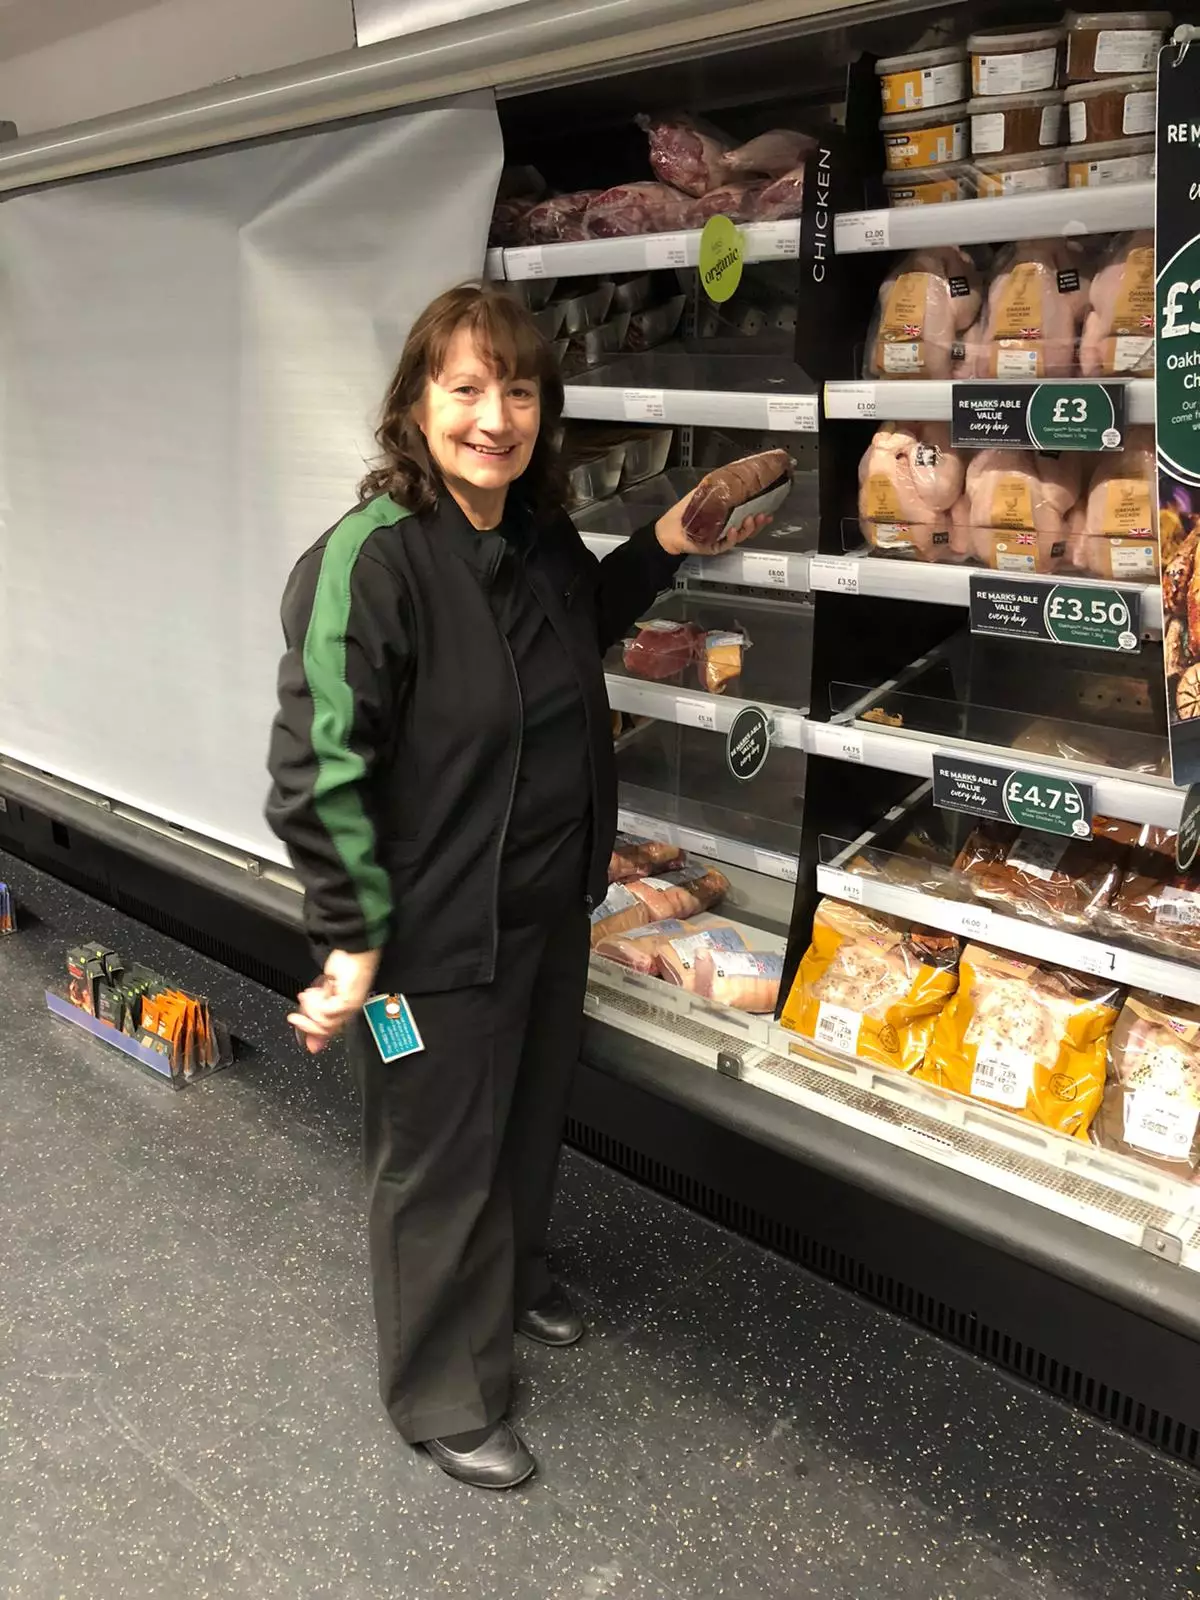 Elaine loves working at Marks and Spencer.